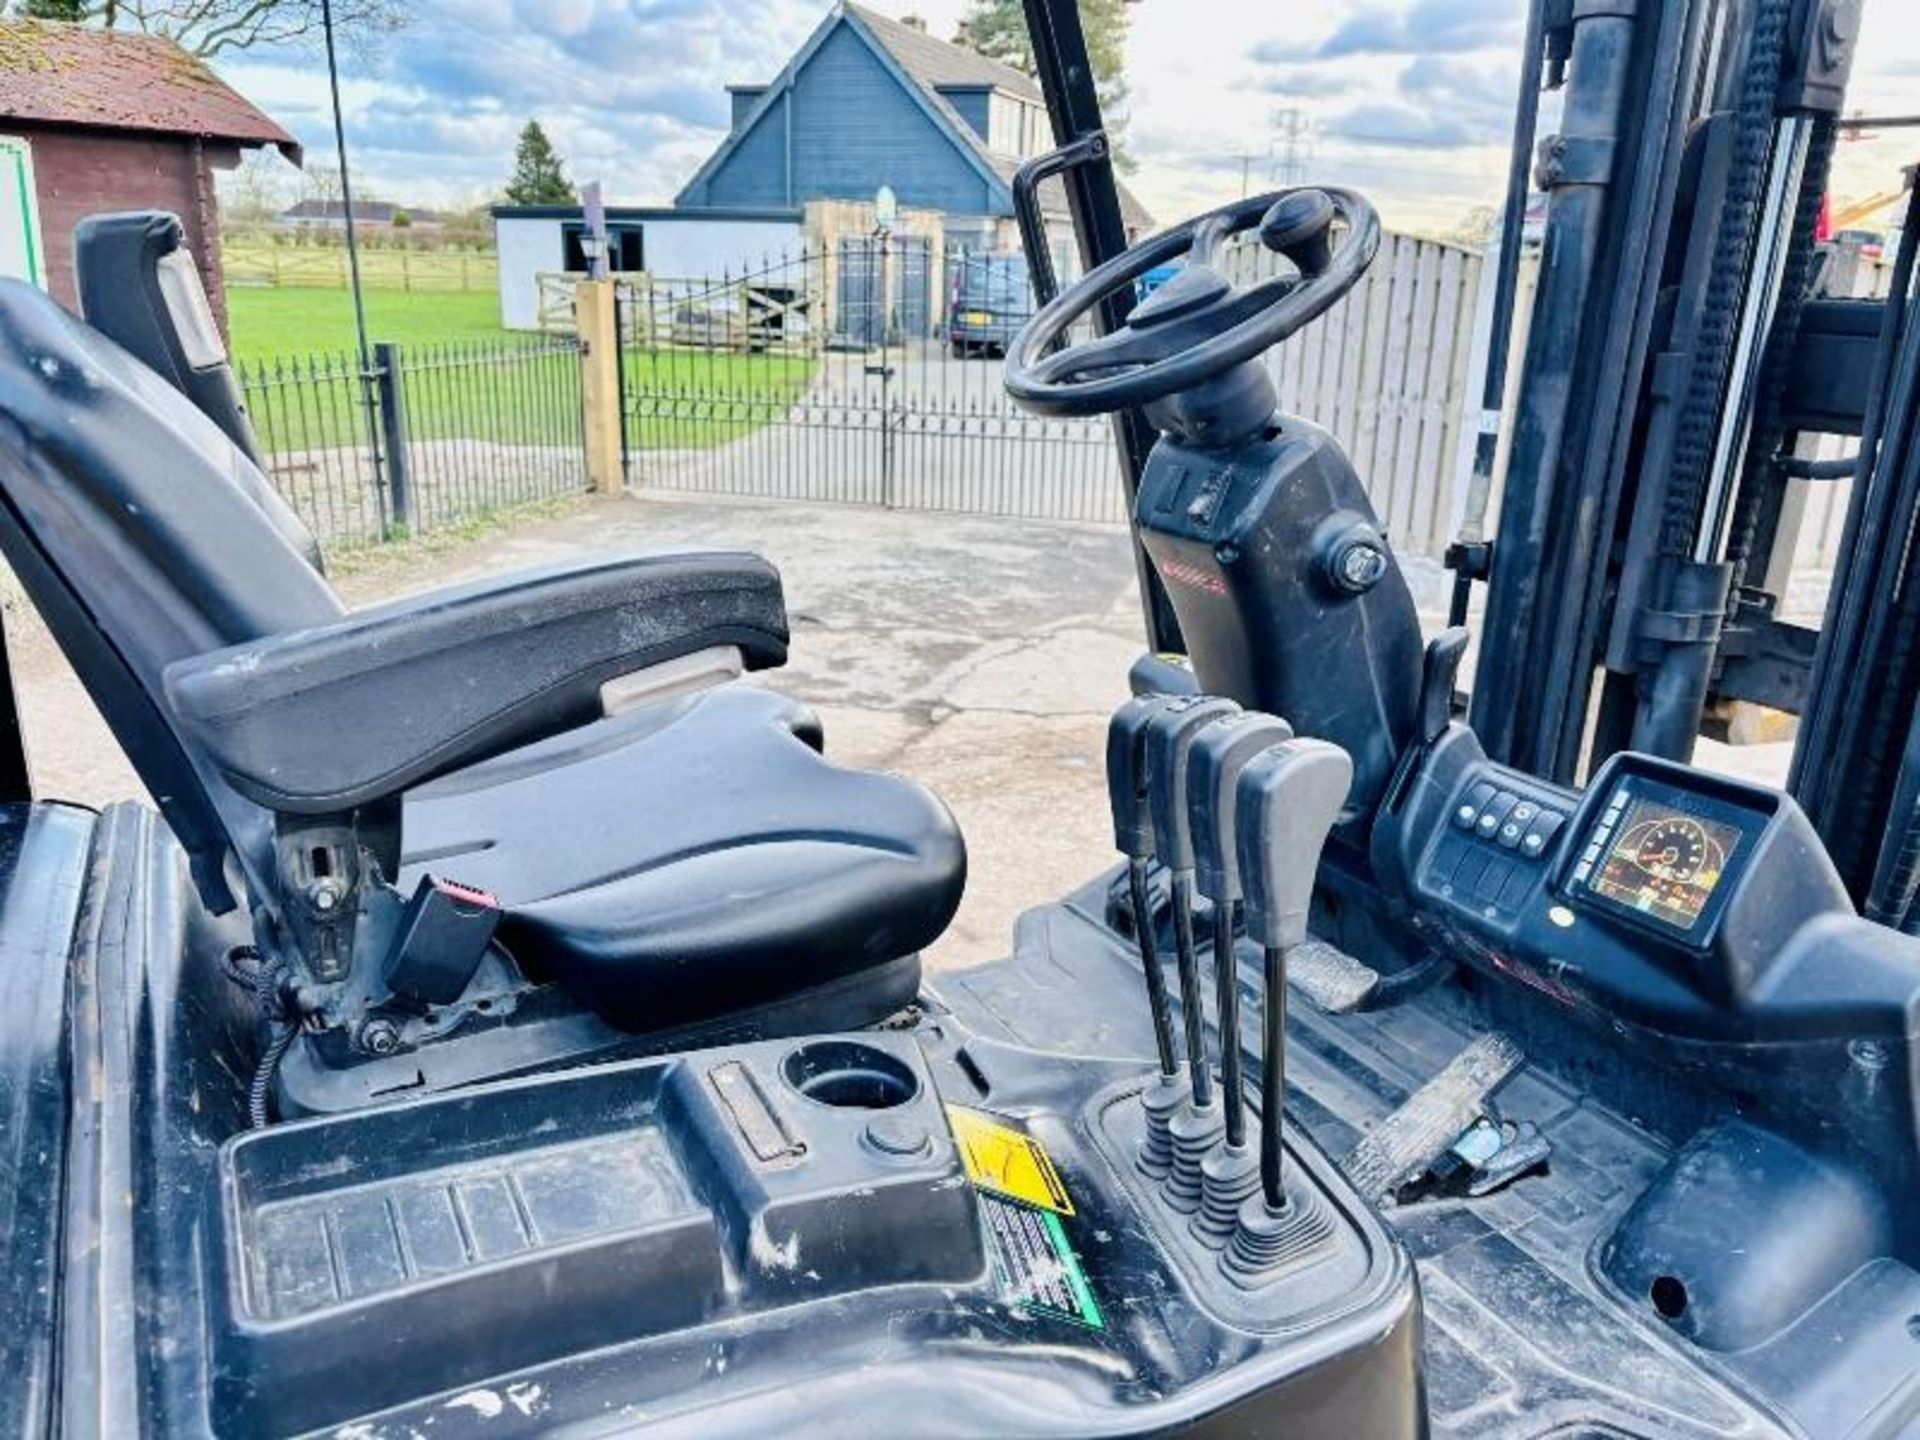 HYUNDAI 25L-9A CONTAINER SPEC FORKLIFT *YEAR 2017, 2956 HOURS* C/W SIDE SHIFT - Image 11 of 16